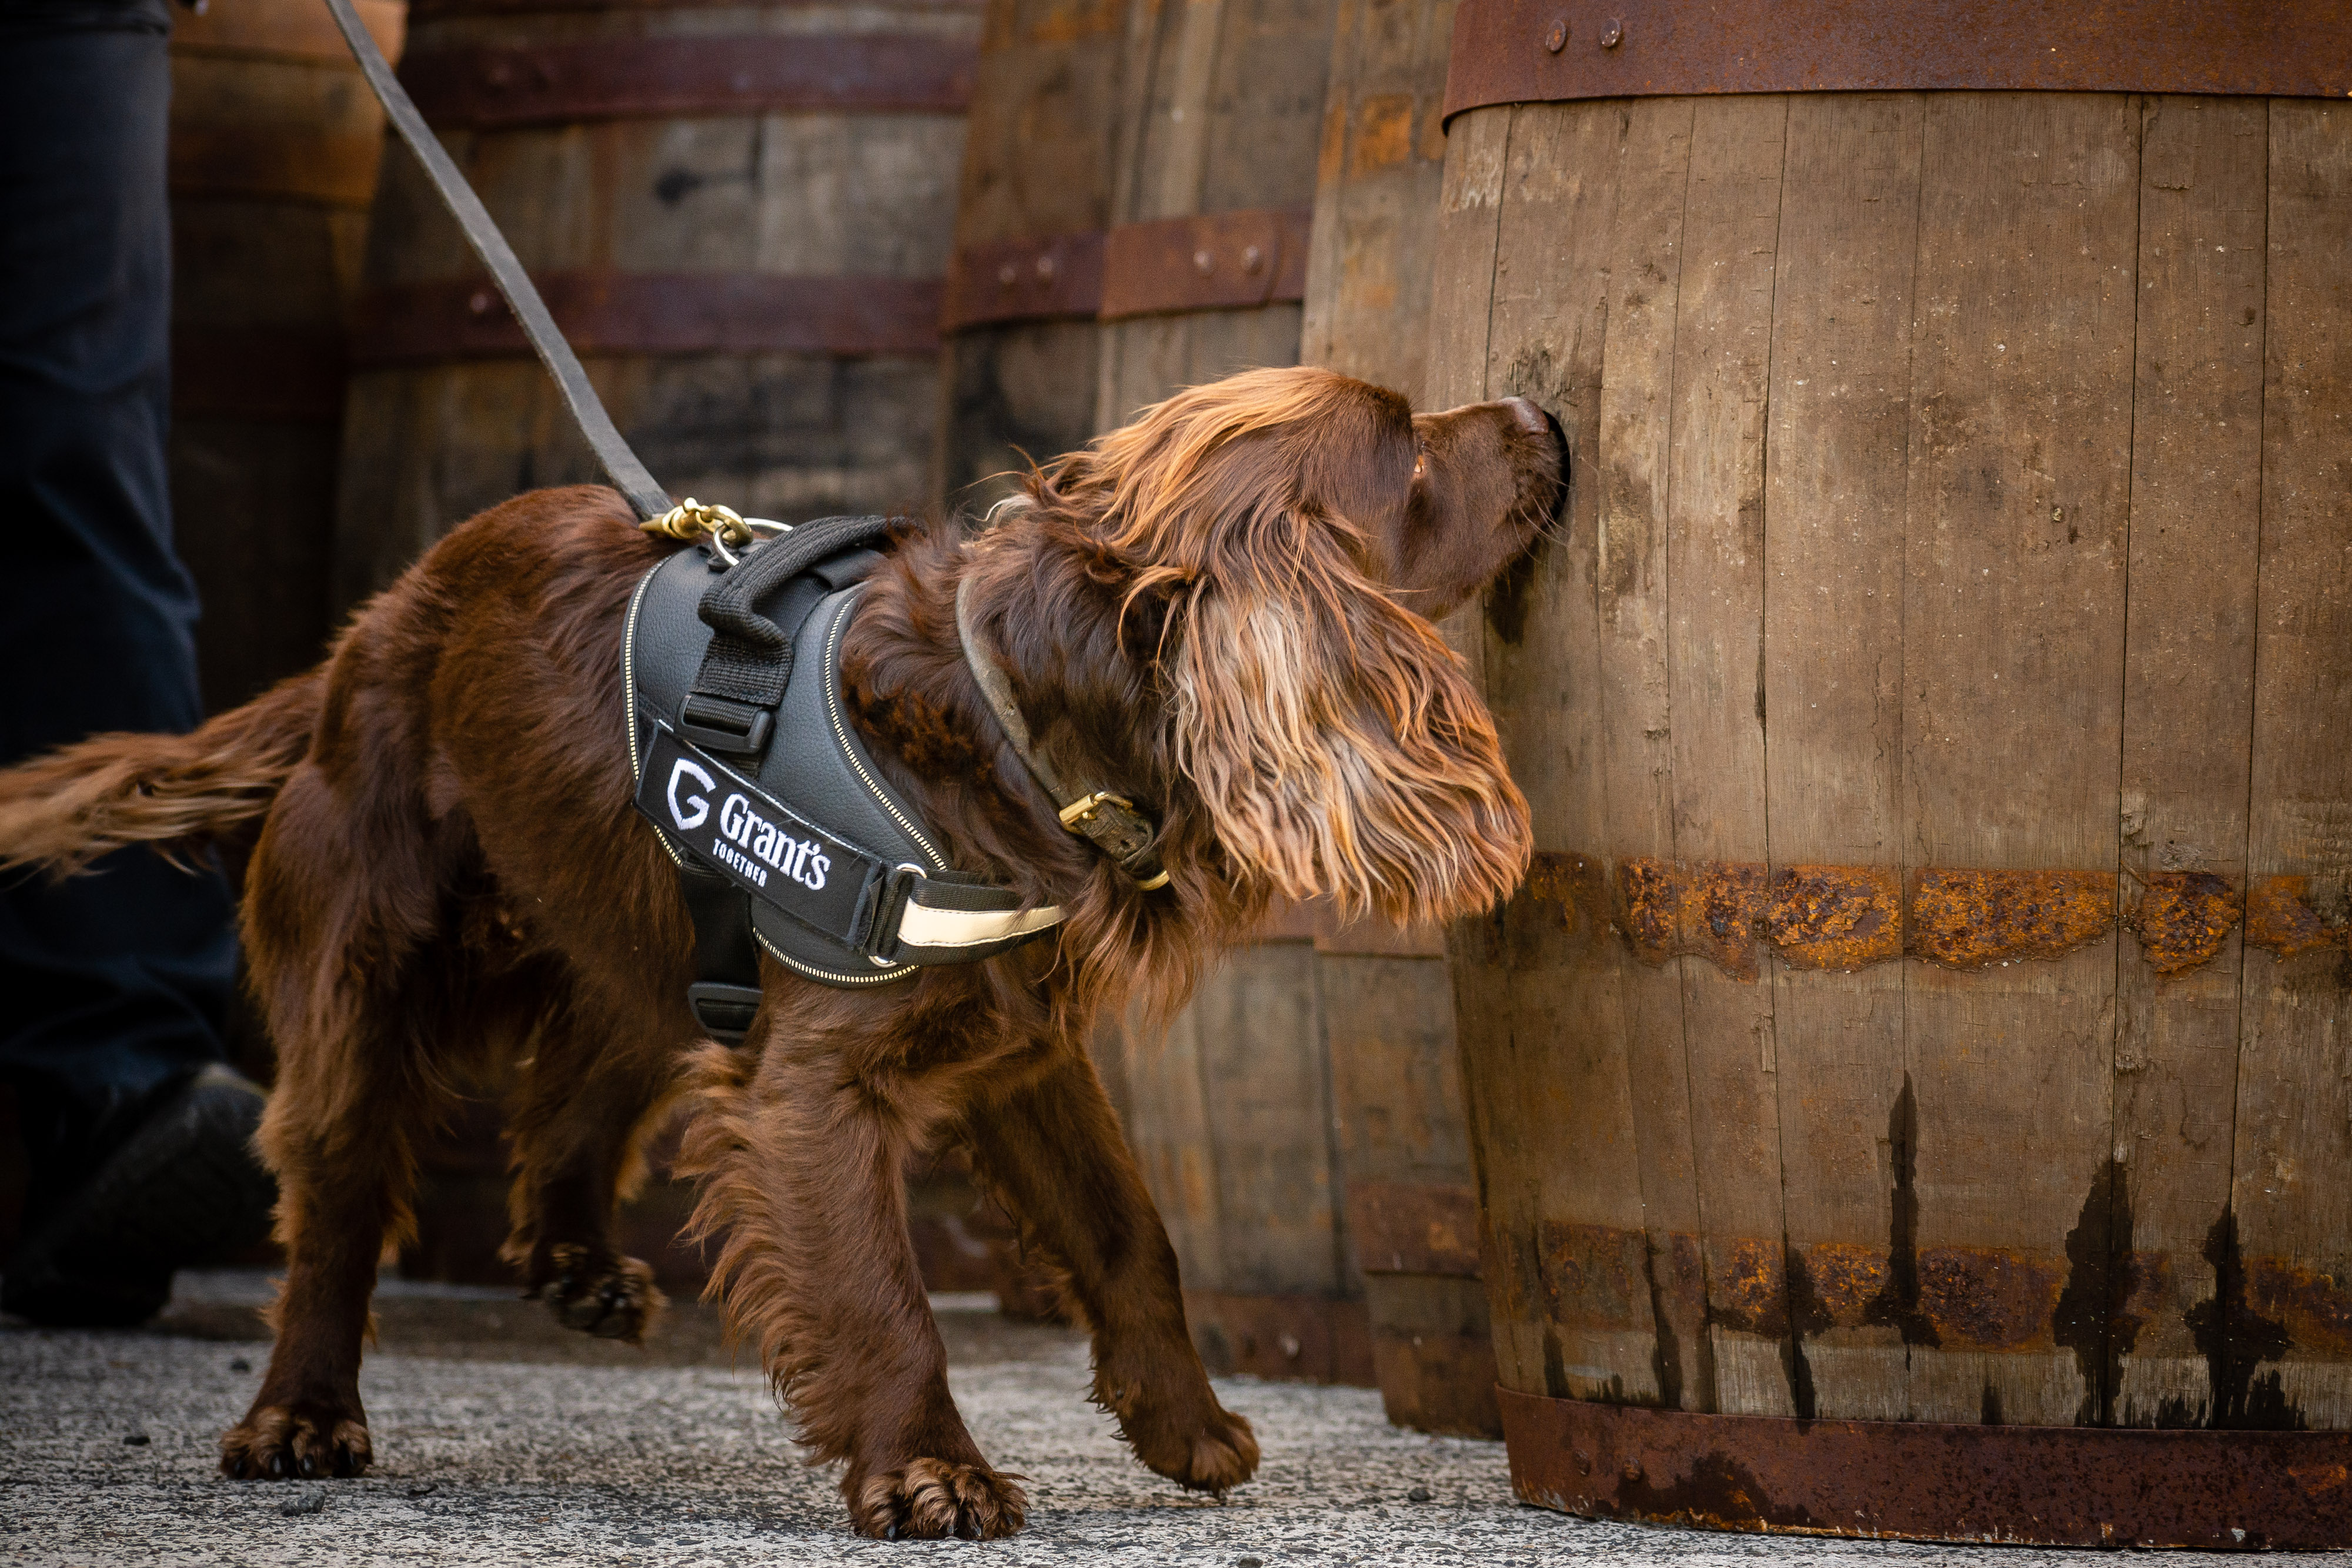 Rocco the sniffer dog at Grant's Whisky distillery